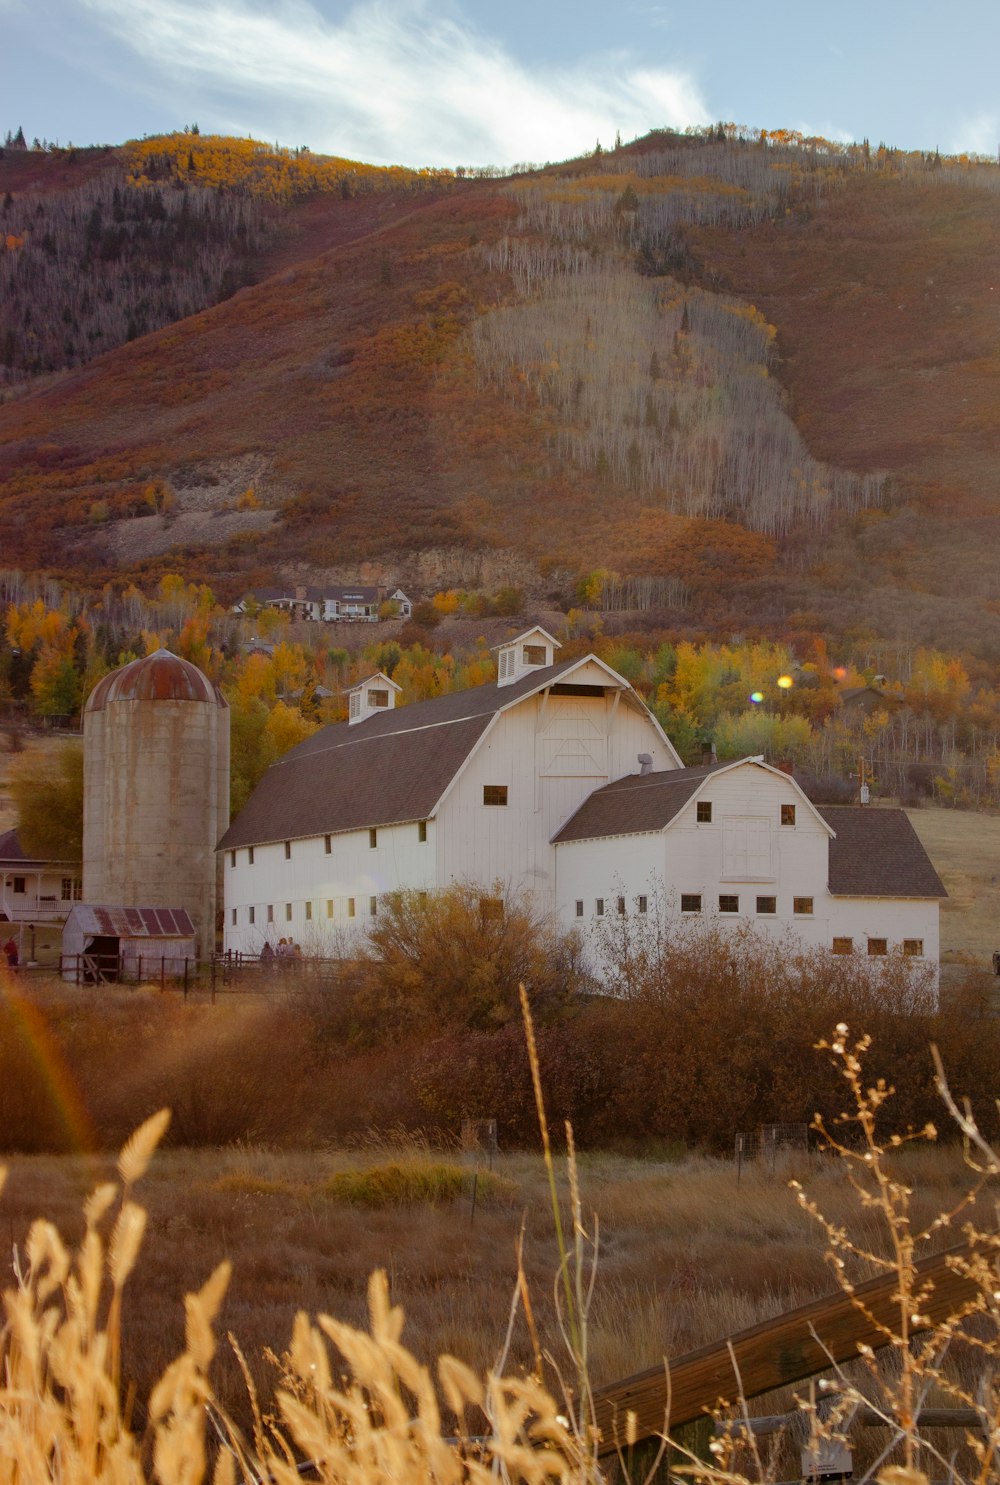 a group of buildings in a valley